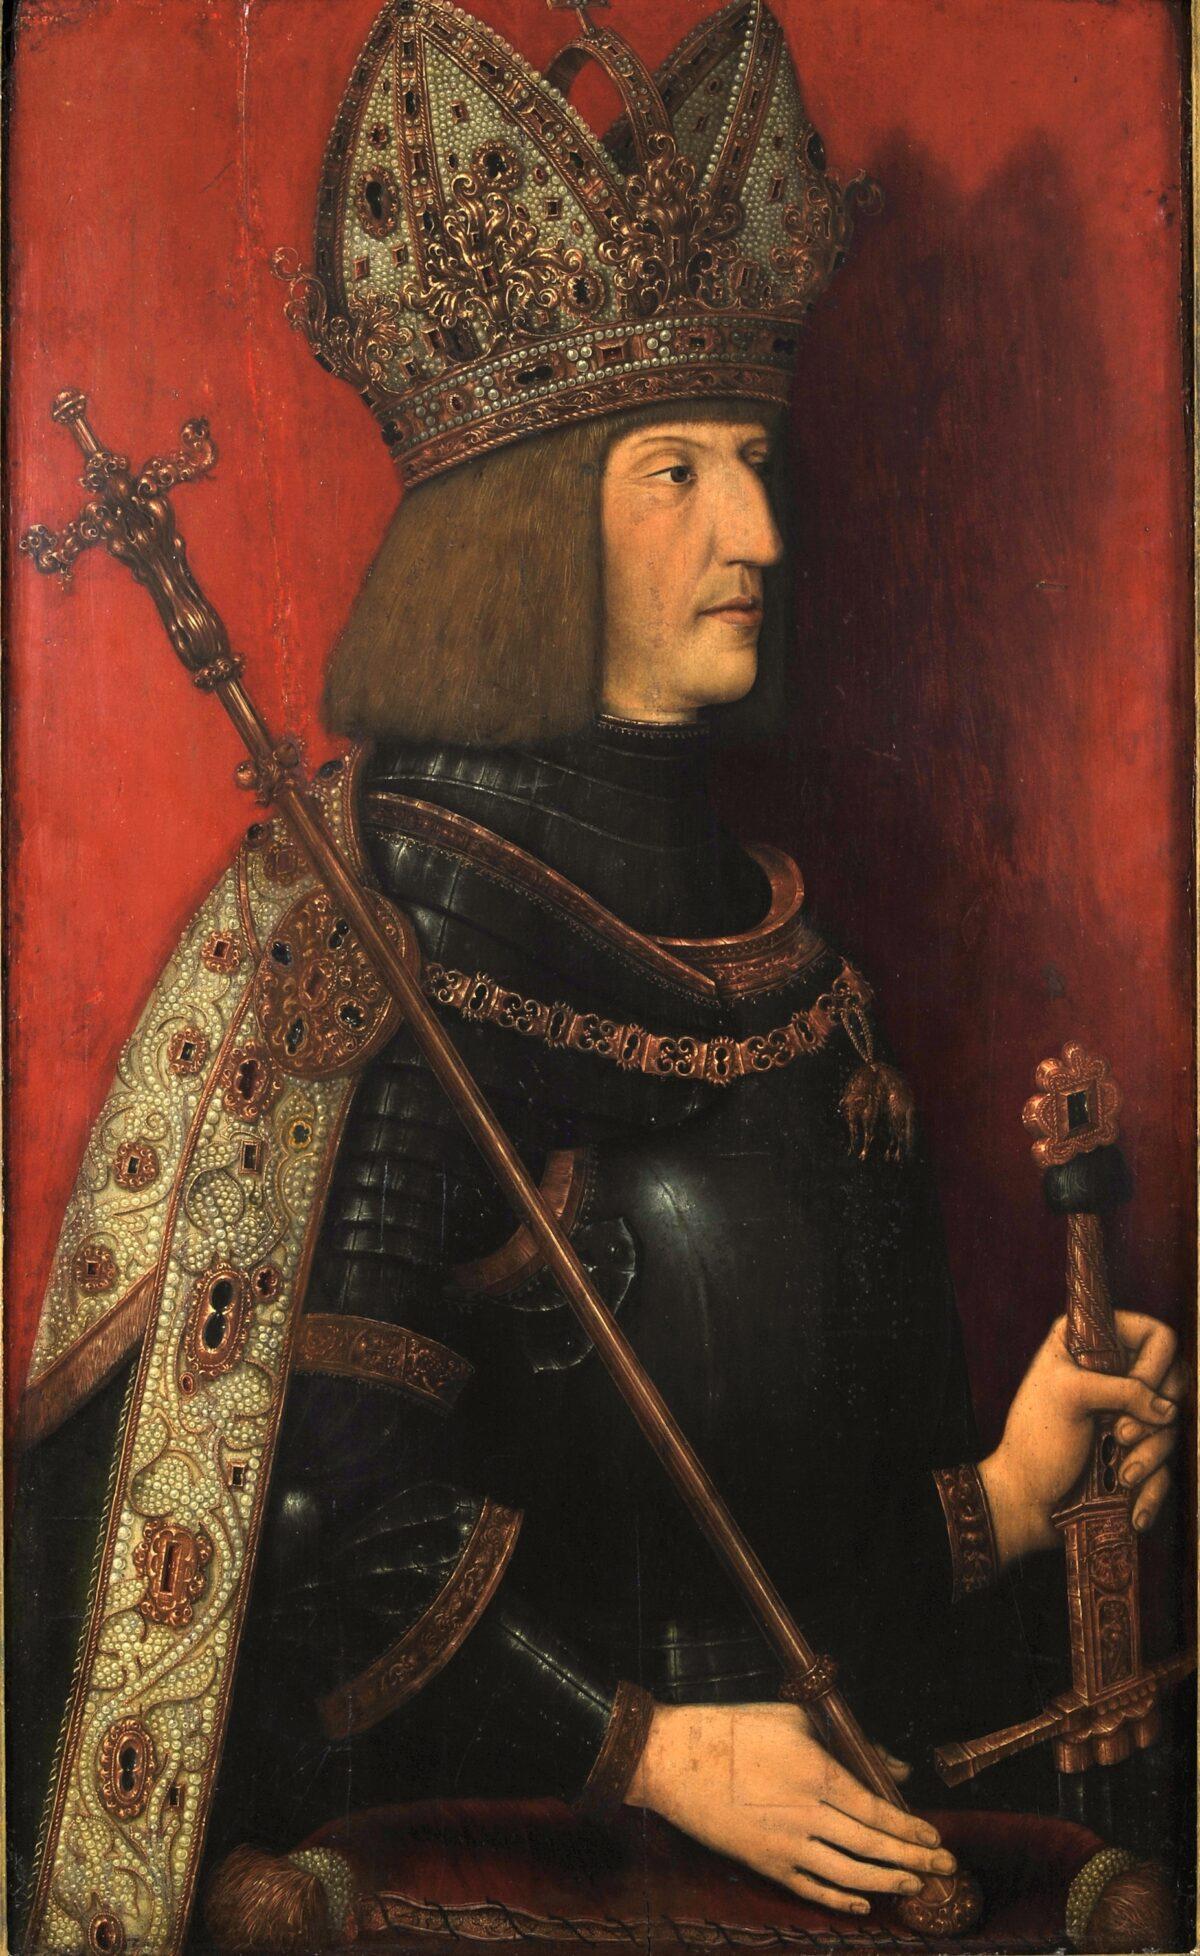 Maximilian I in imperial regalia, after 1508, by Bernhard Strigel. Oil on wood. Tyrolean State Museum, on long-term loan from a private collection (Gem 136). (Tyrolean State Museum)